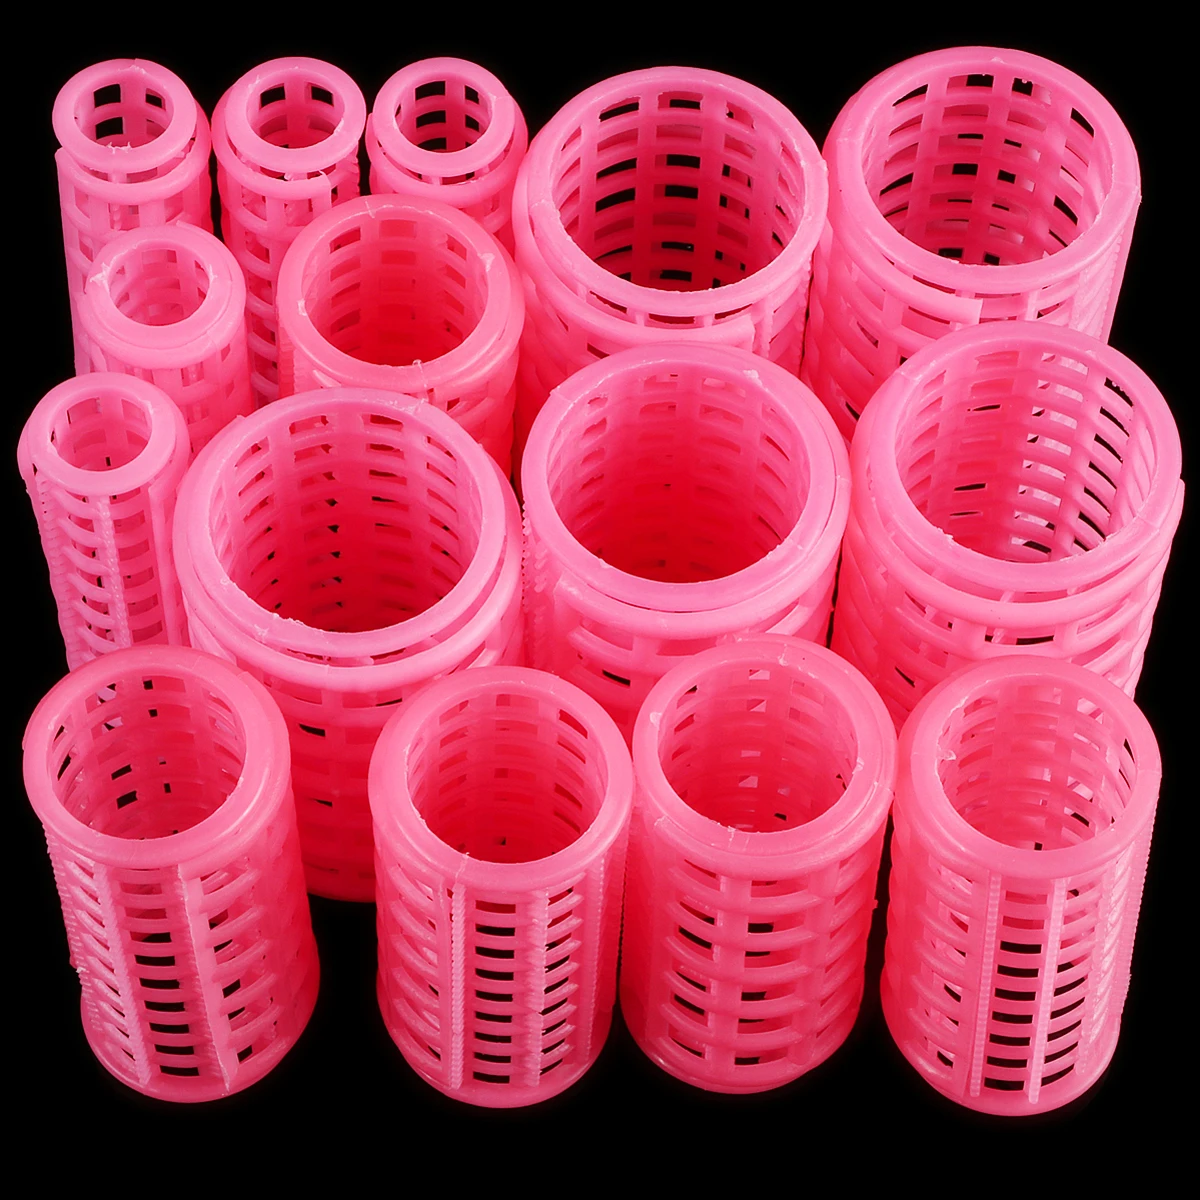 

15pcs/Set Plastic Hair Curler Roller Large Grip Styling Roller Curlers Hairdressing DIY Tools Styling Home Use Hair Rollers